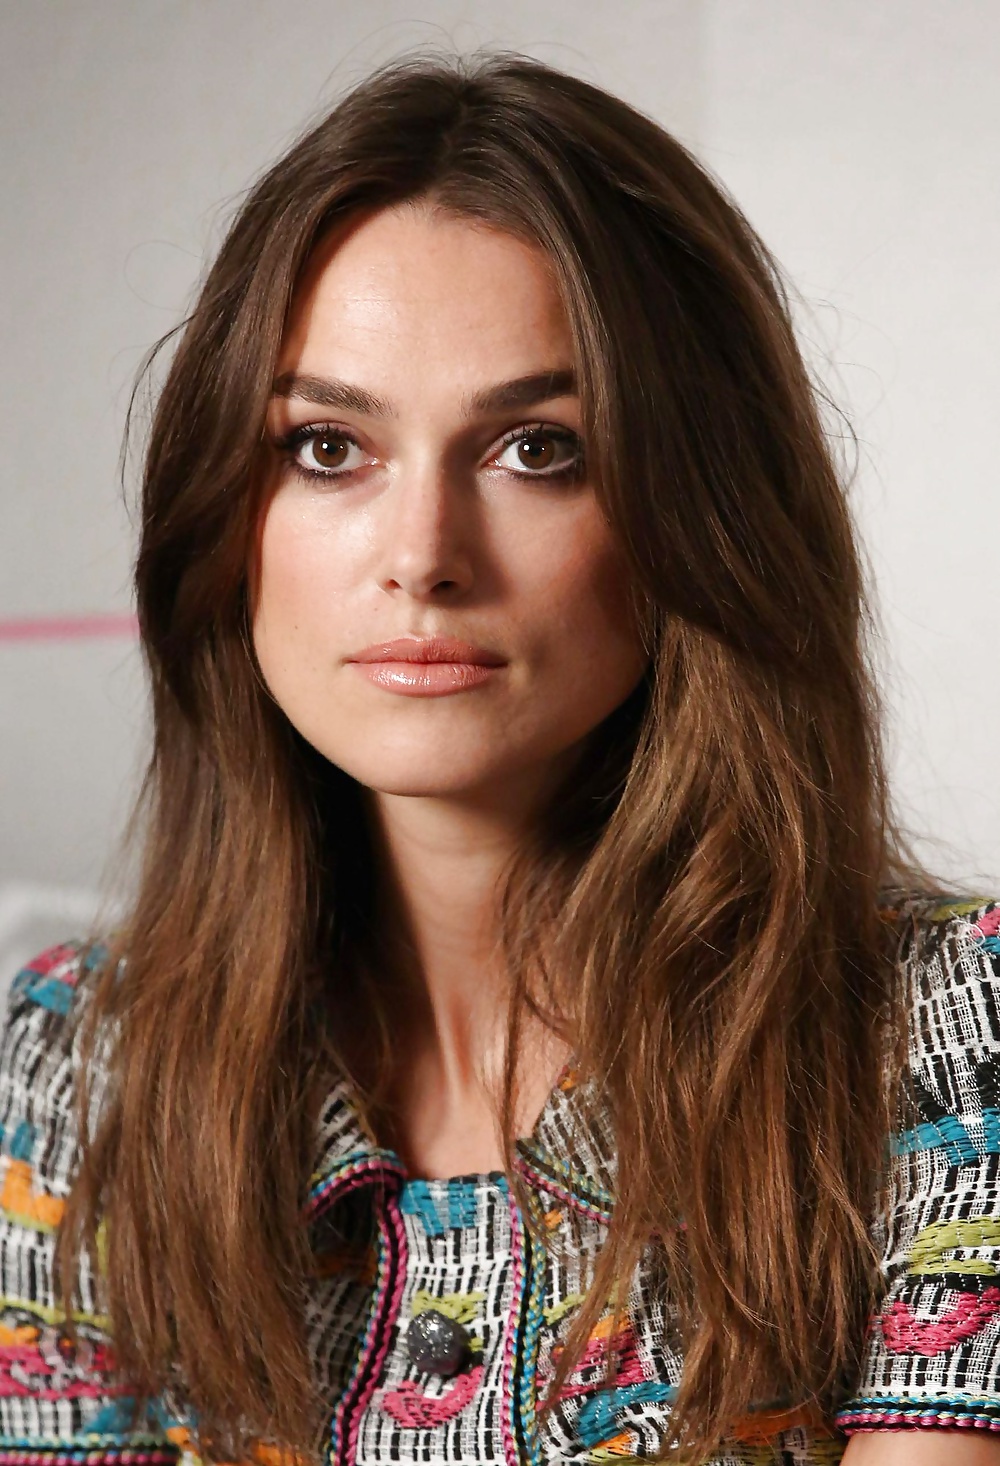 Keira Knightley The Royal Lady of England #35649342